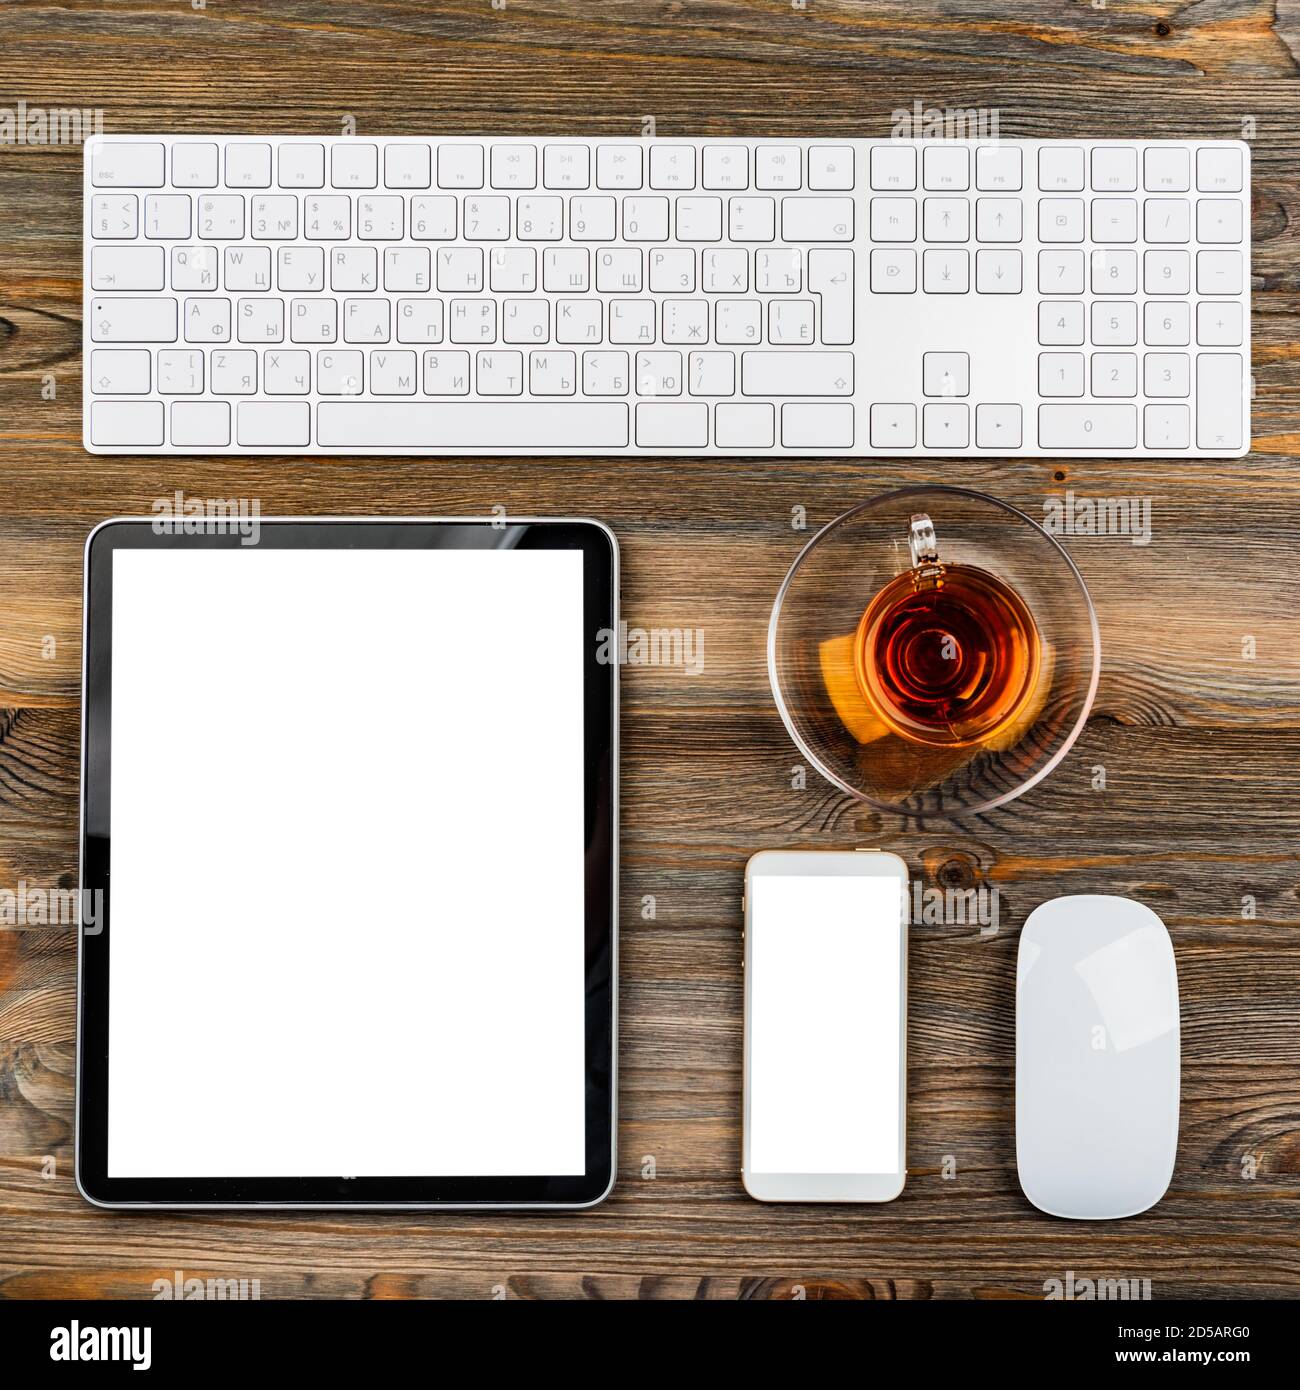 office table with computer keyboard, mouse, cup of tea, tablet pc and smartphone Stock Photo